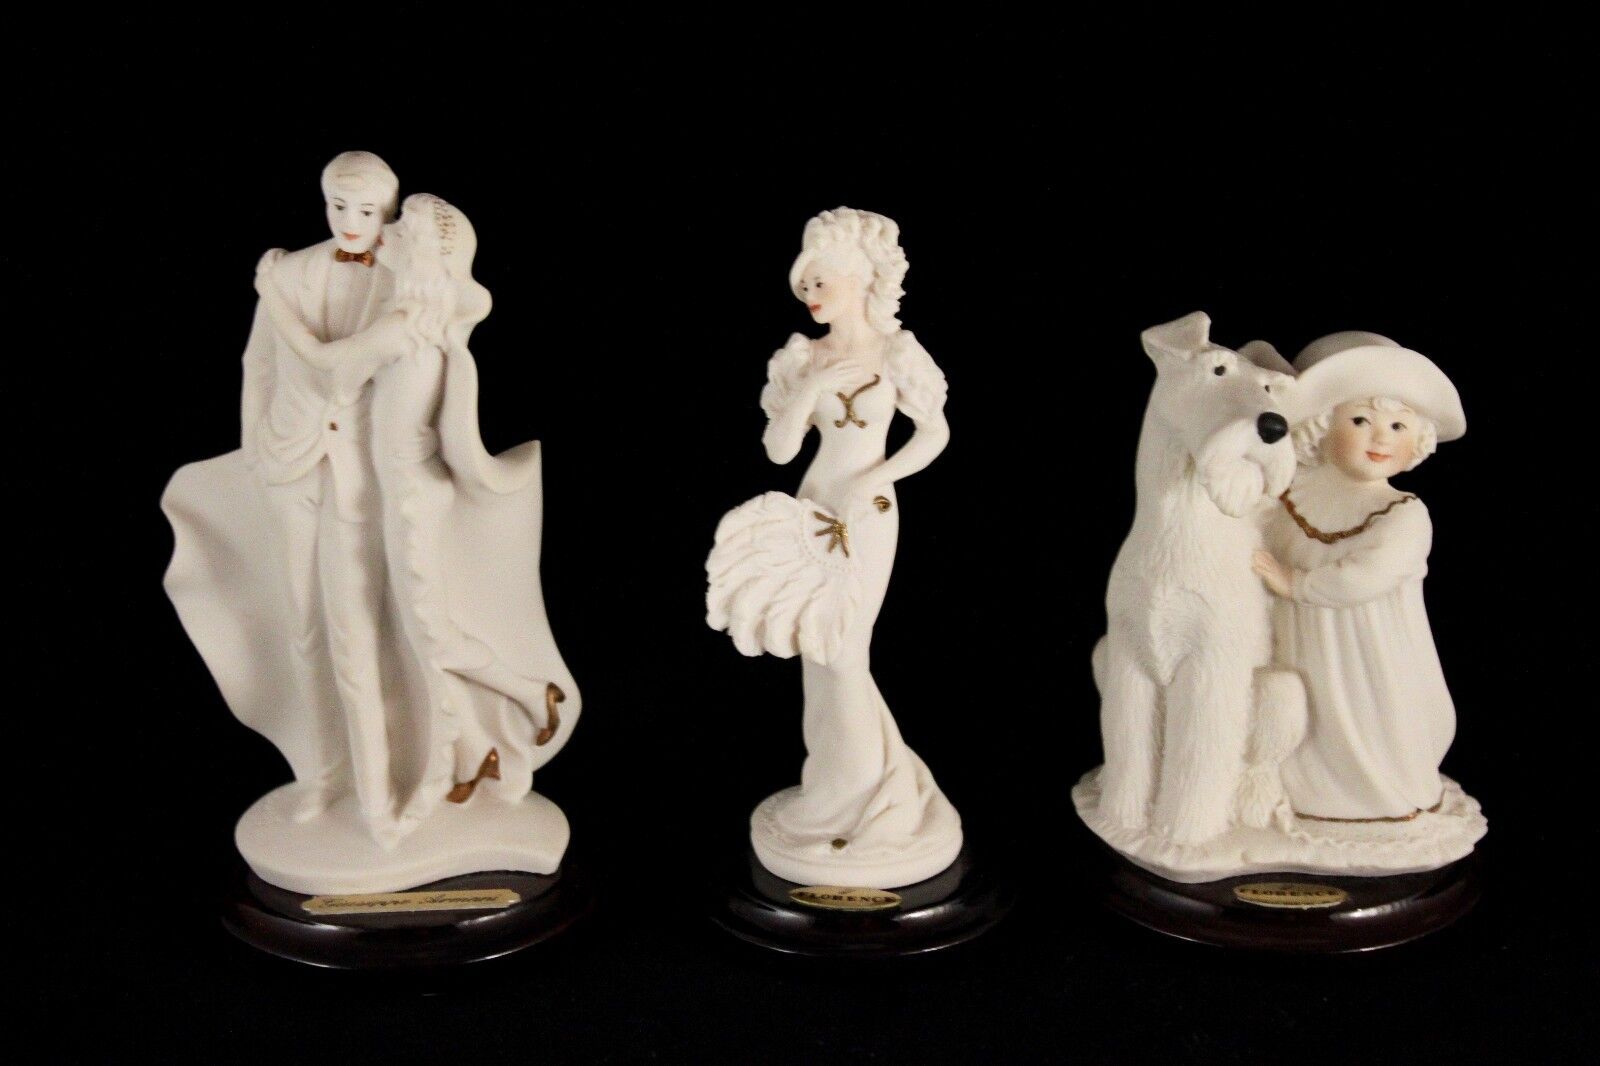 G. ARMANI FLORENCE FIGURINES SCULPTURES FOR CLUB MEMBERS LOT OF 3 – MINT